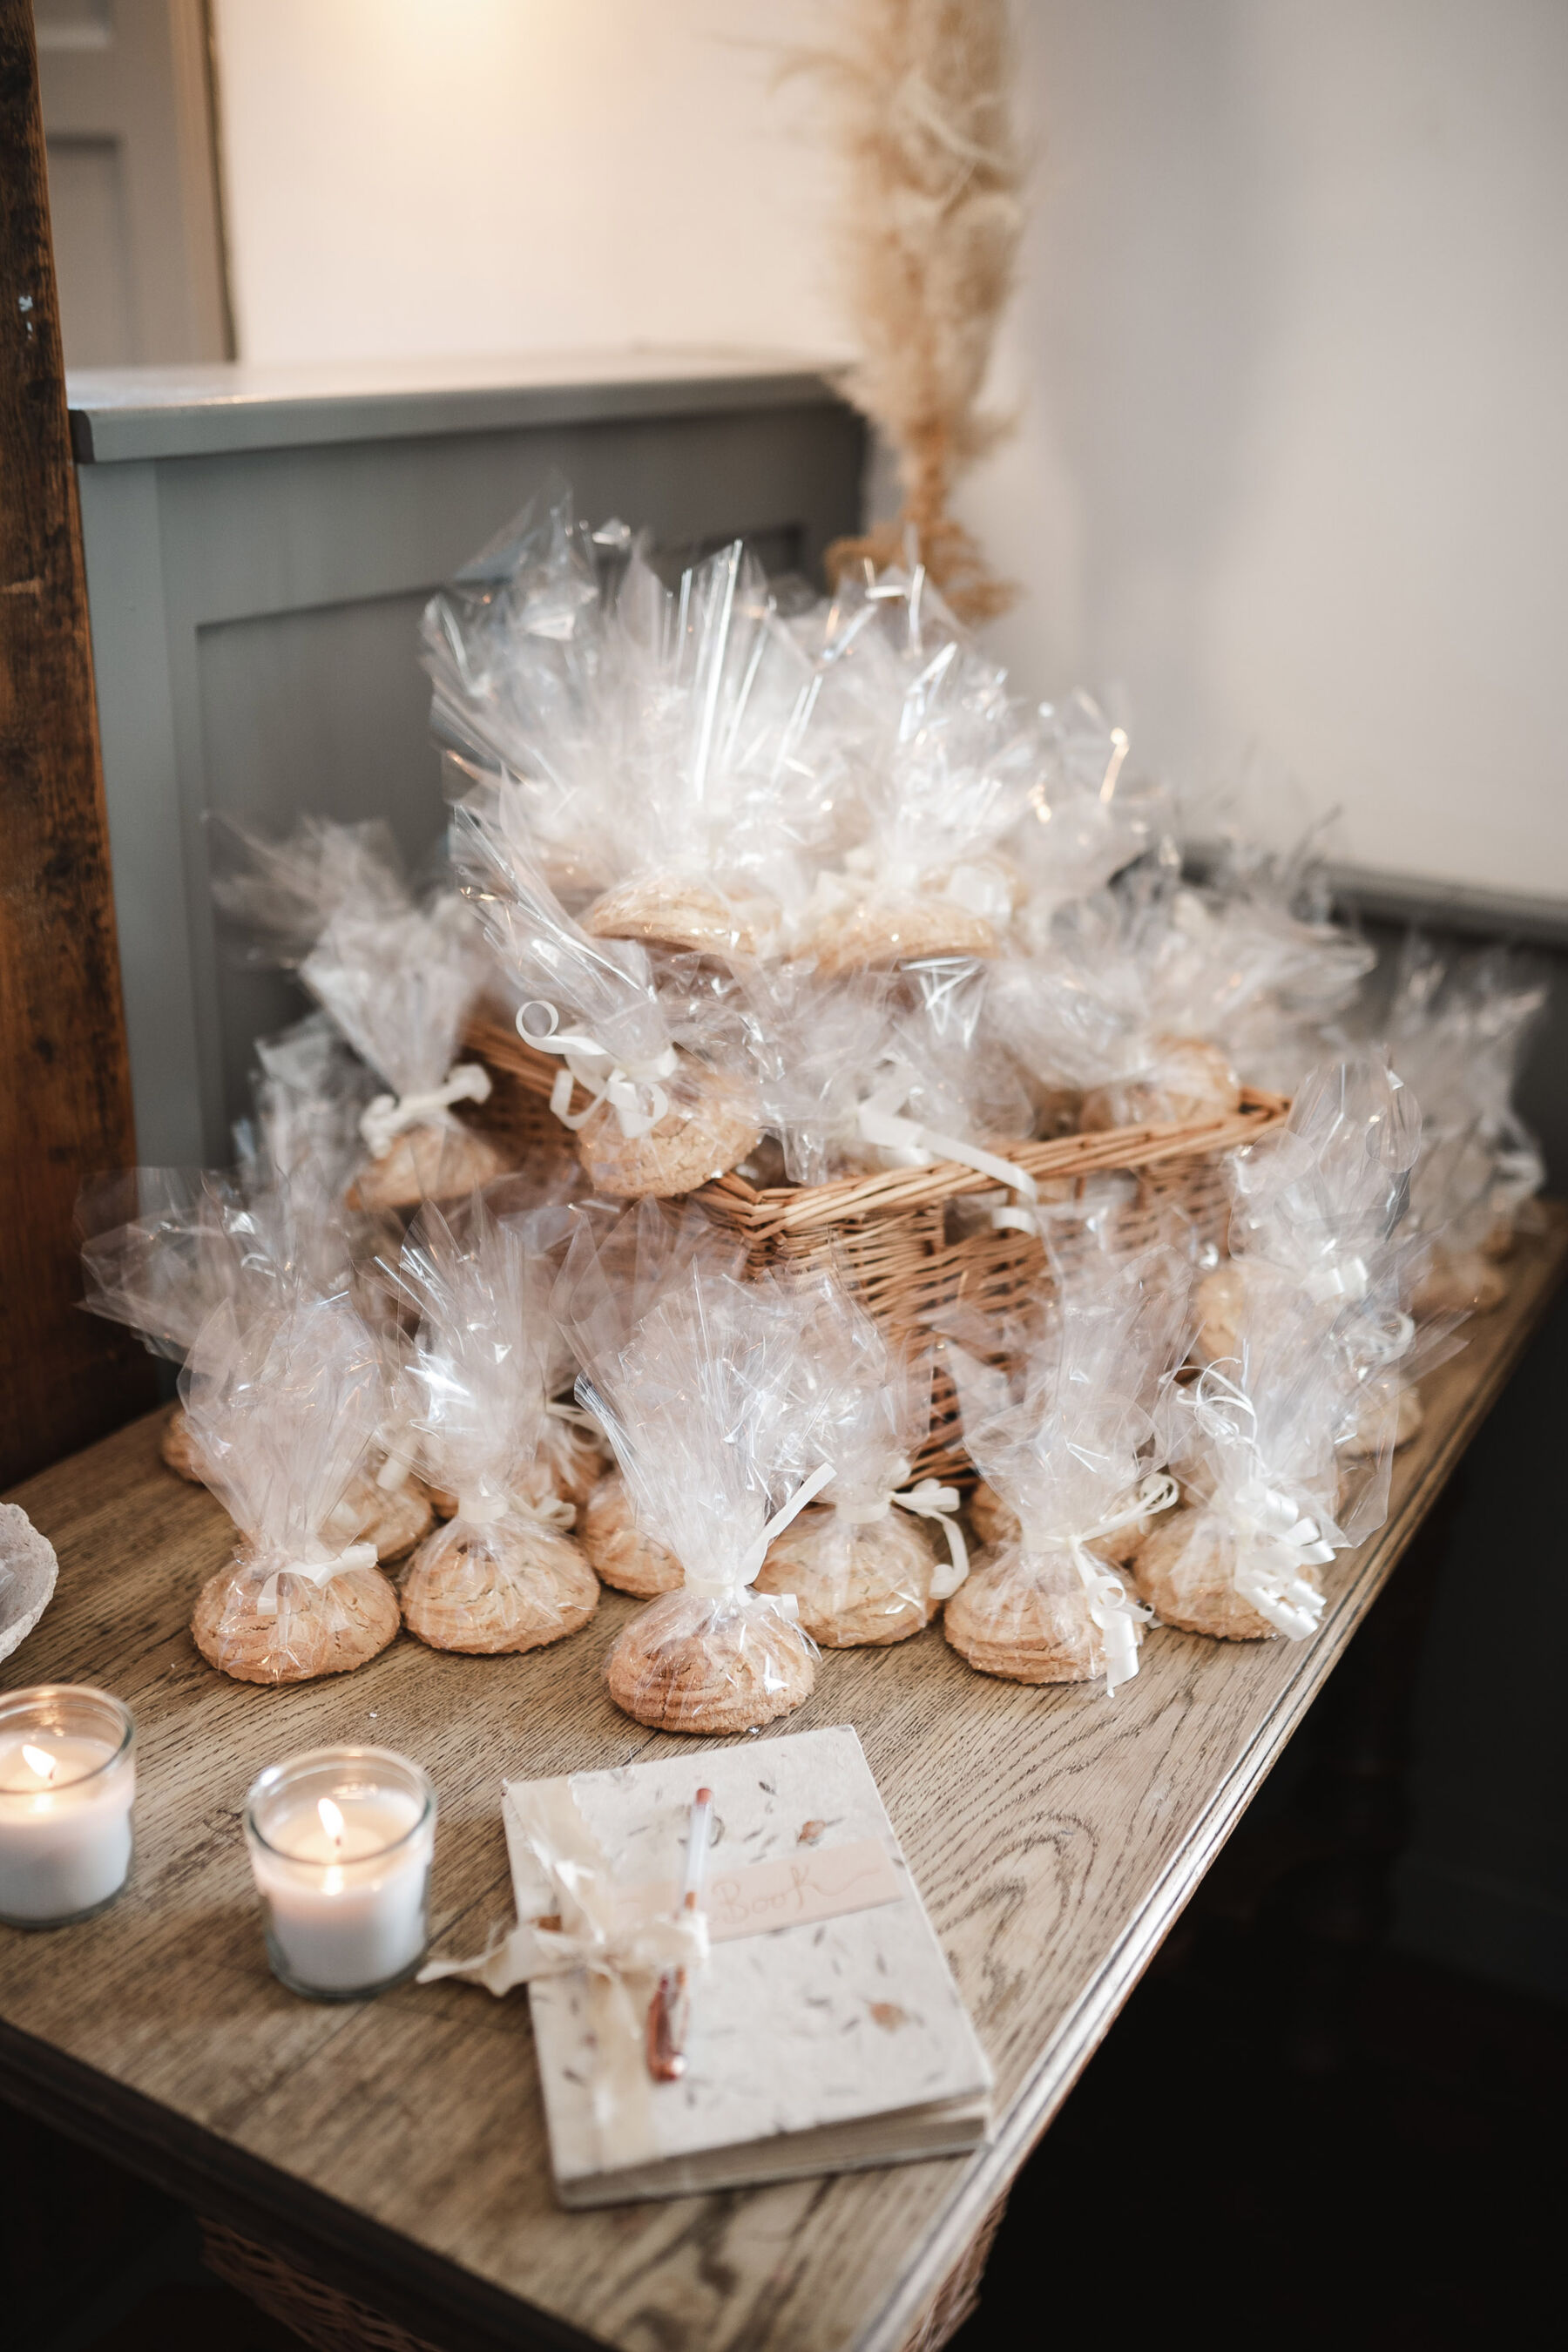 Cypriot pastichio biscuits wedding favours. By Karolina Photography.